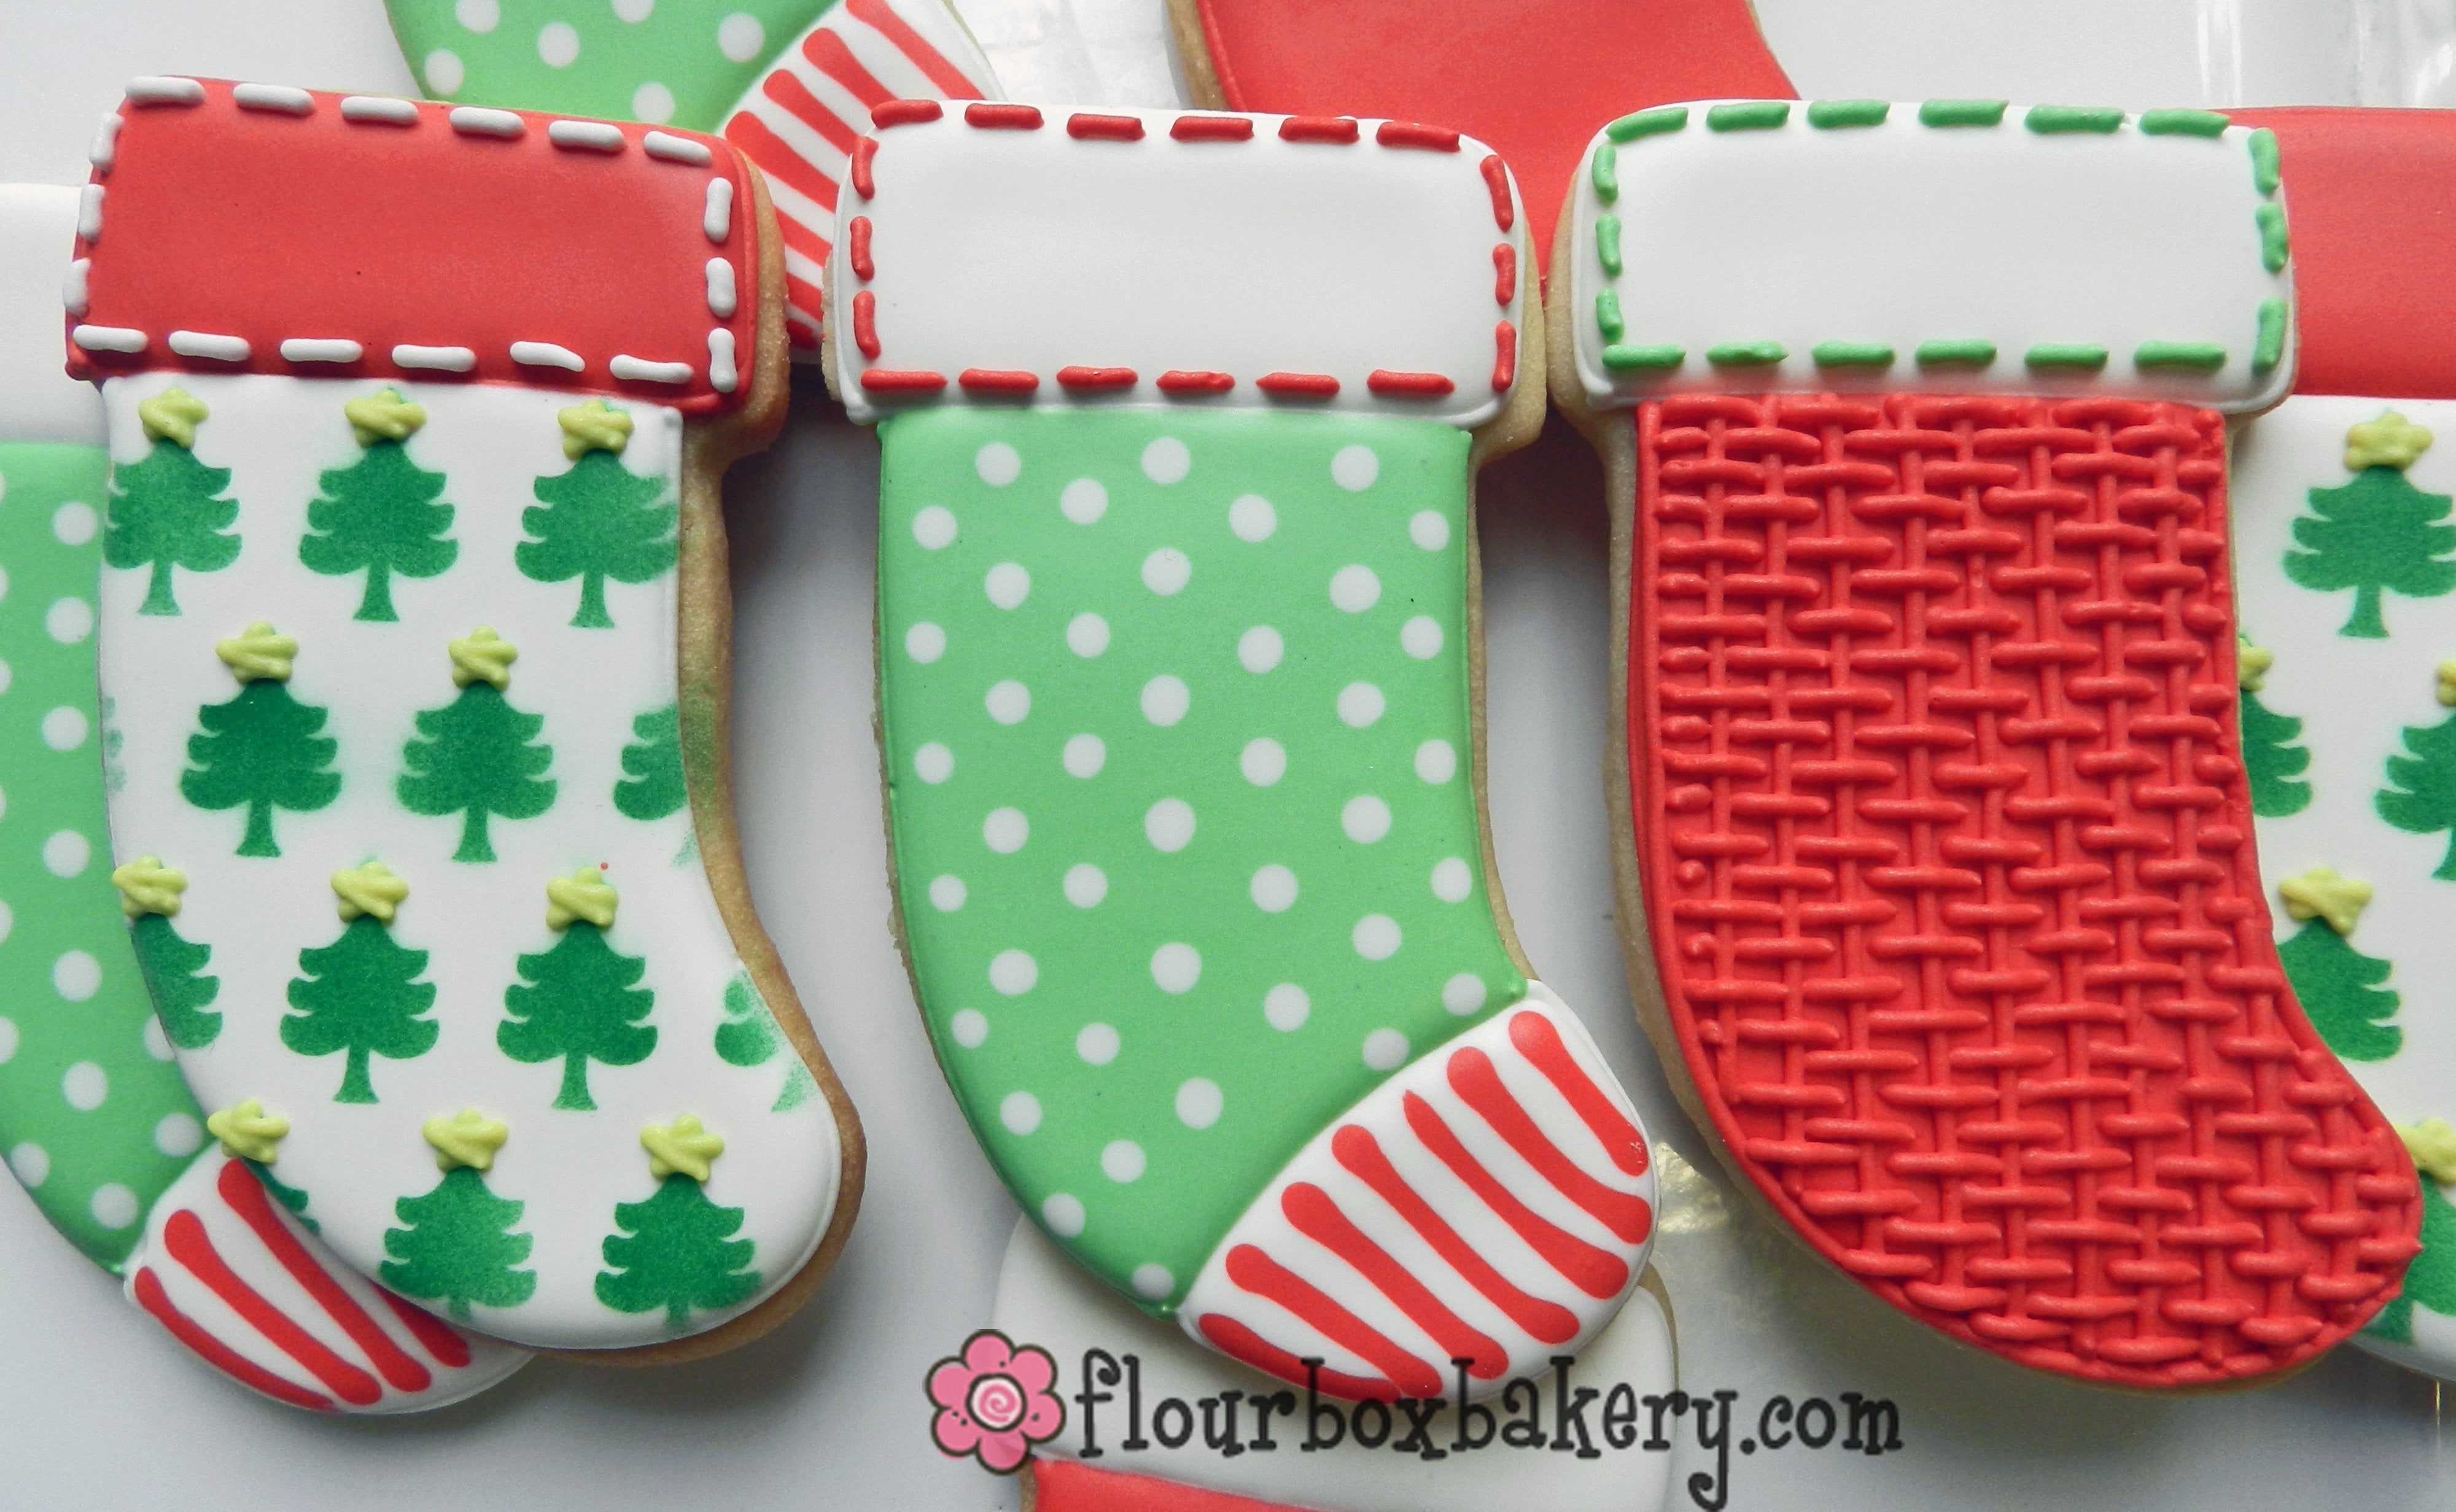 How to Decorate a Christmas Stocking – The Flour Box